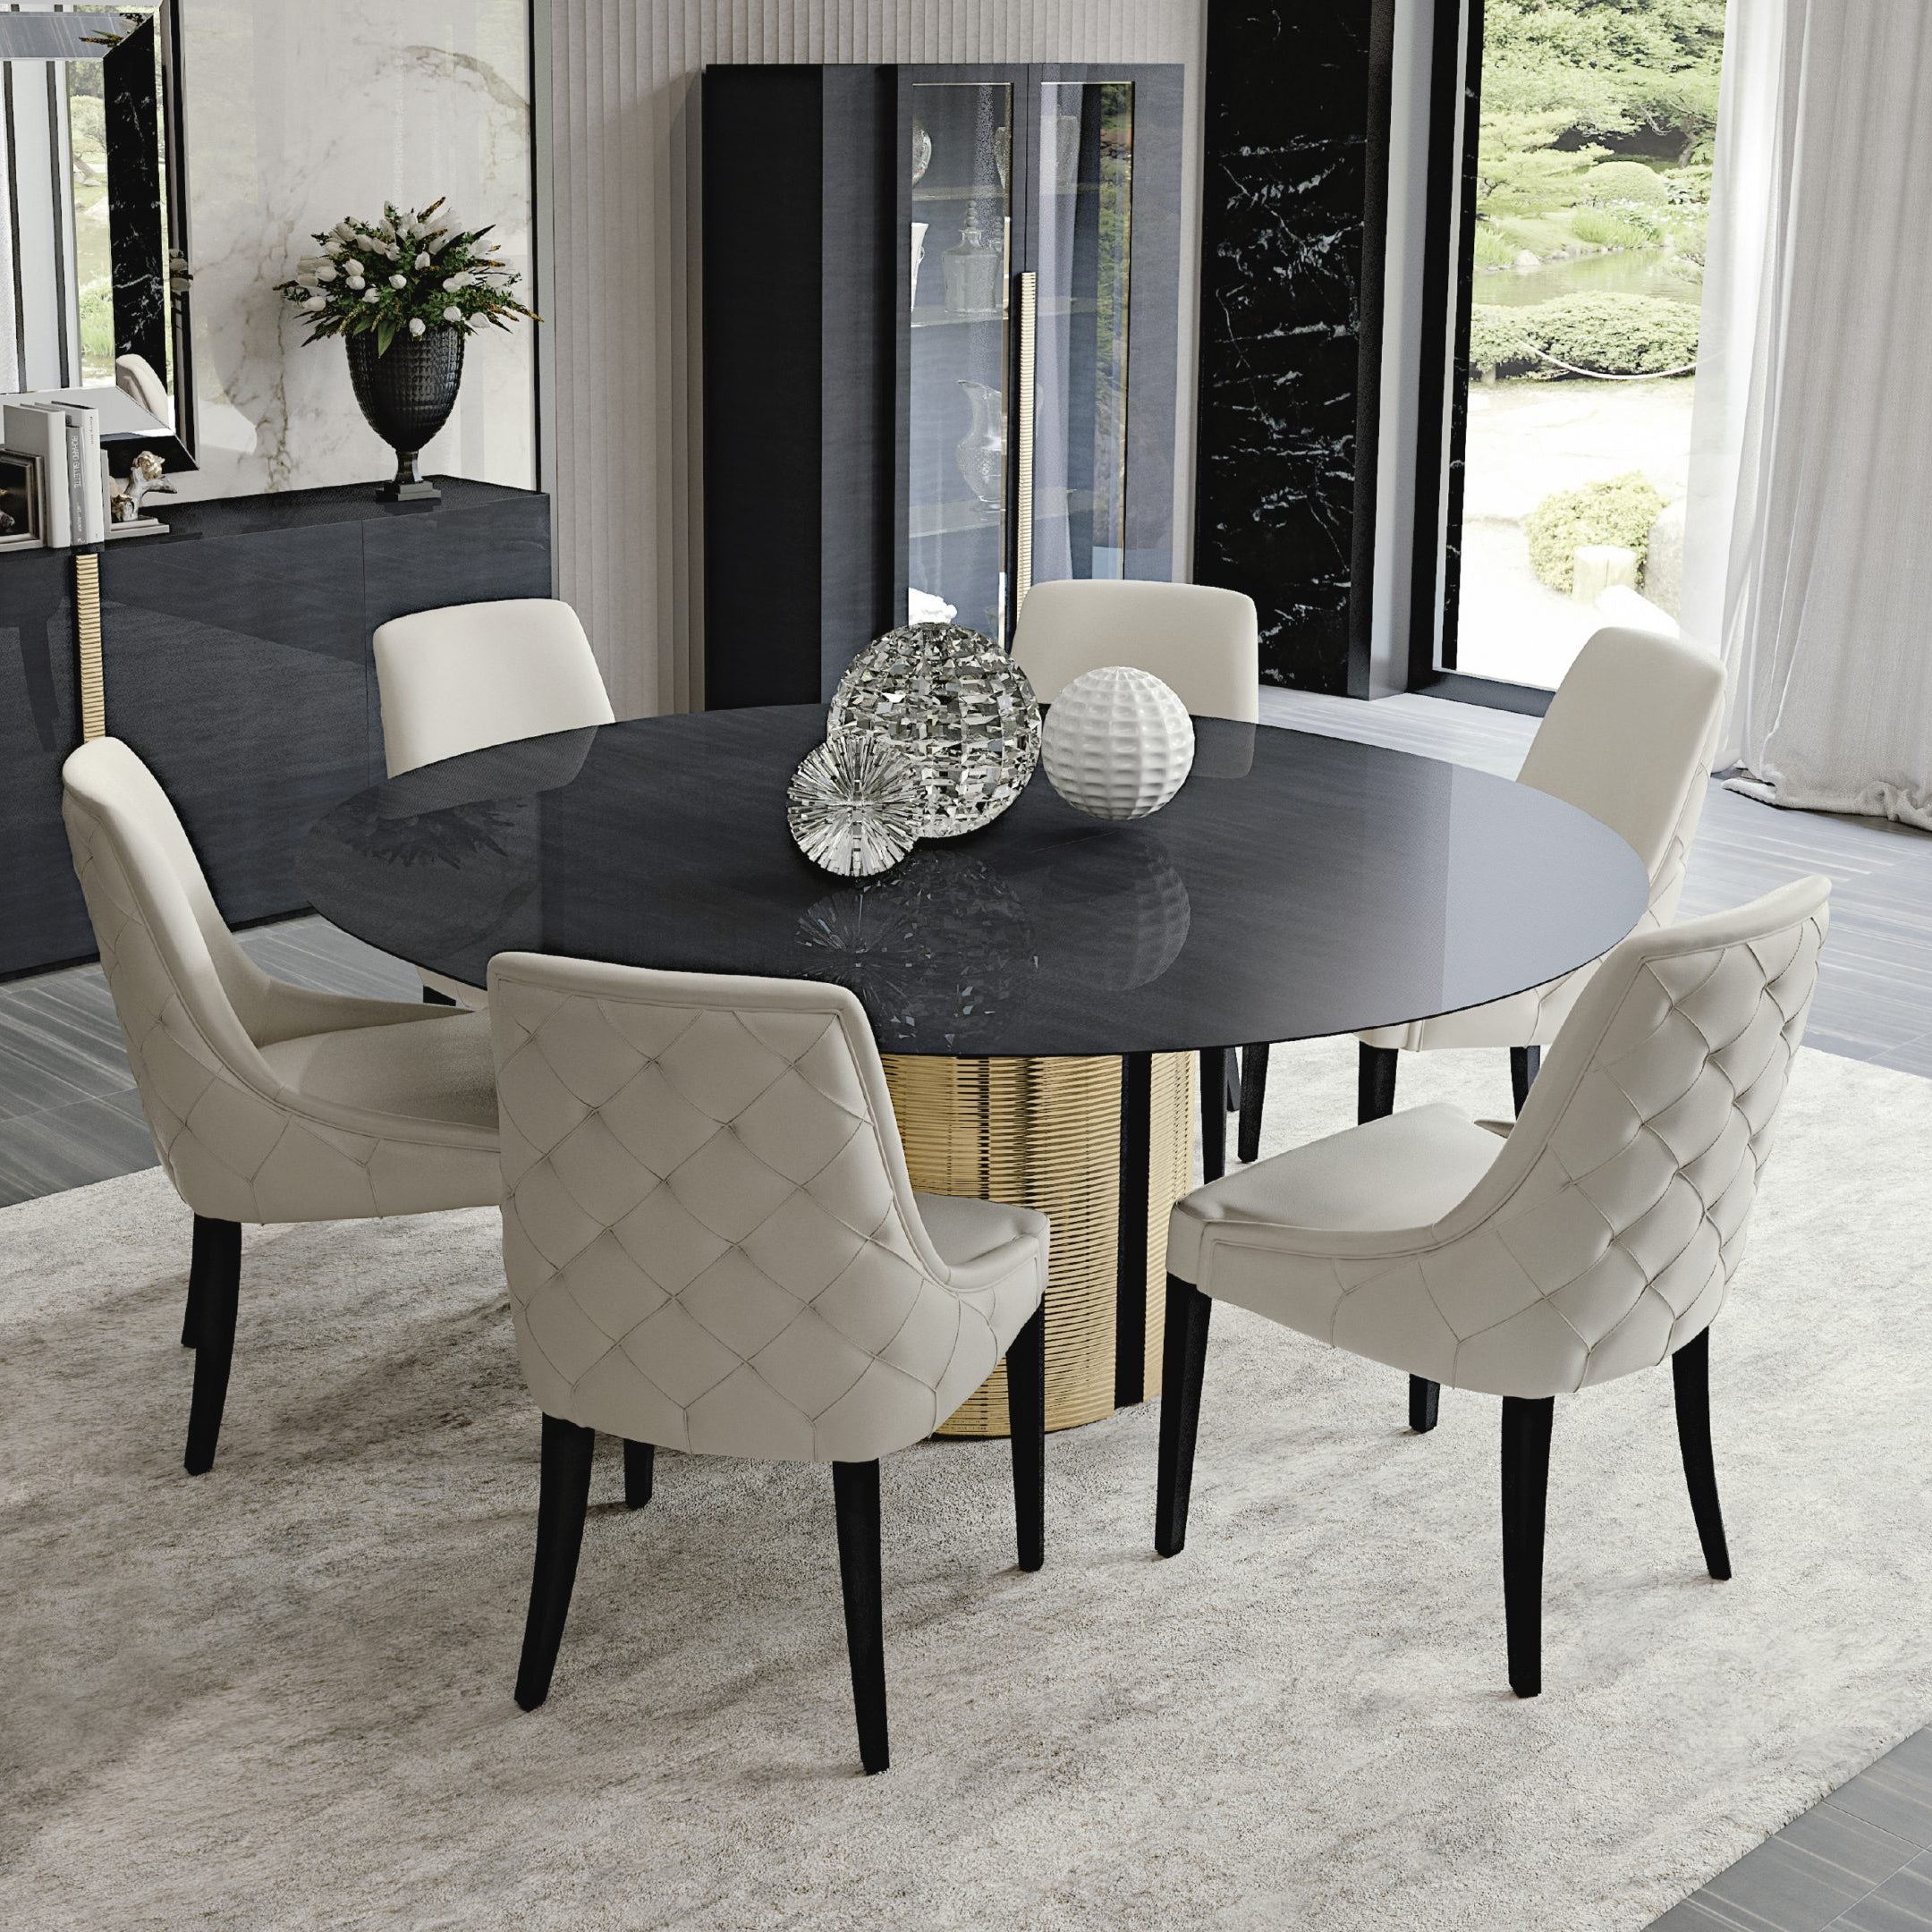 Modern classic collection_SECRET LOVE dining chairs5